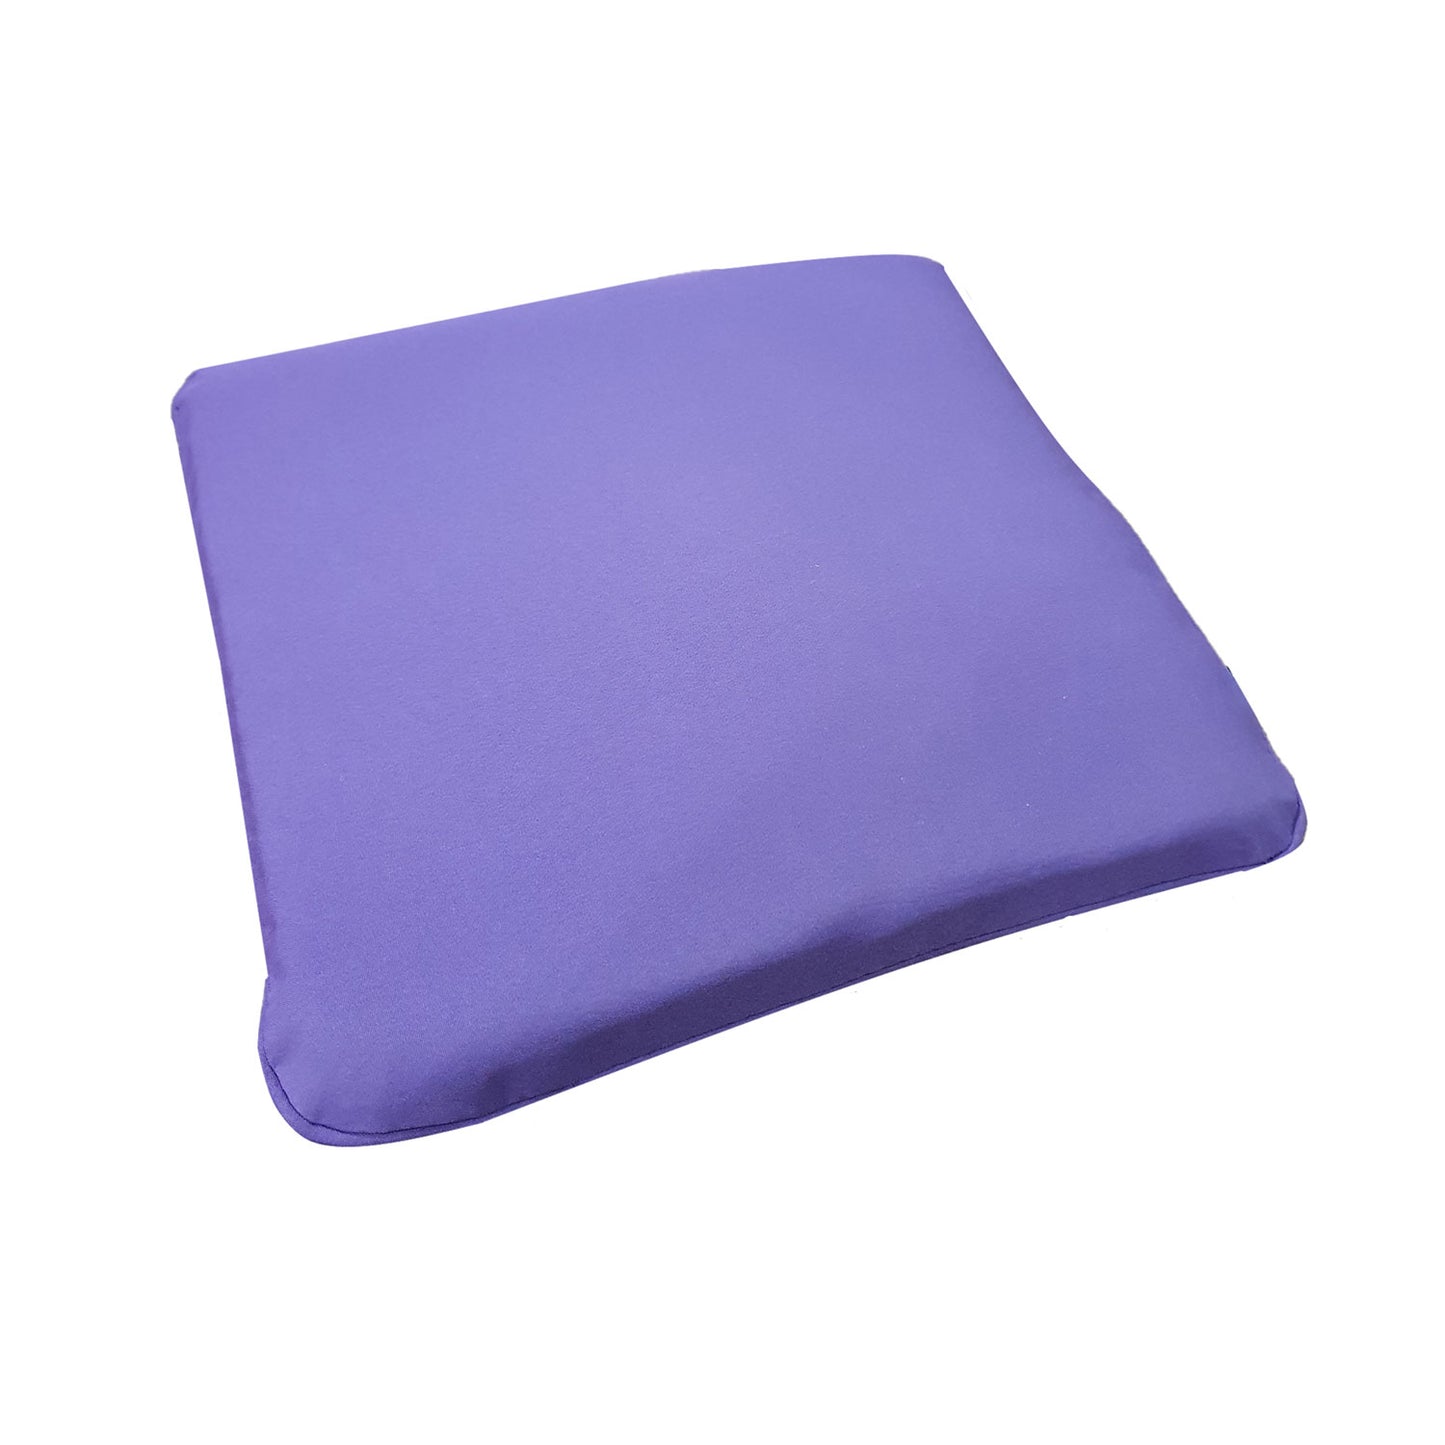 CC Collection Plum Garden Seat Pad (Pack of 2)